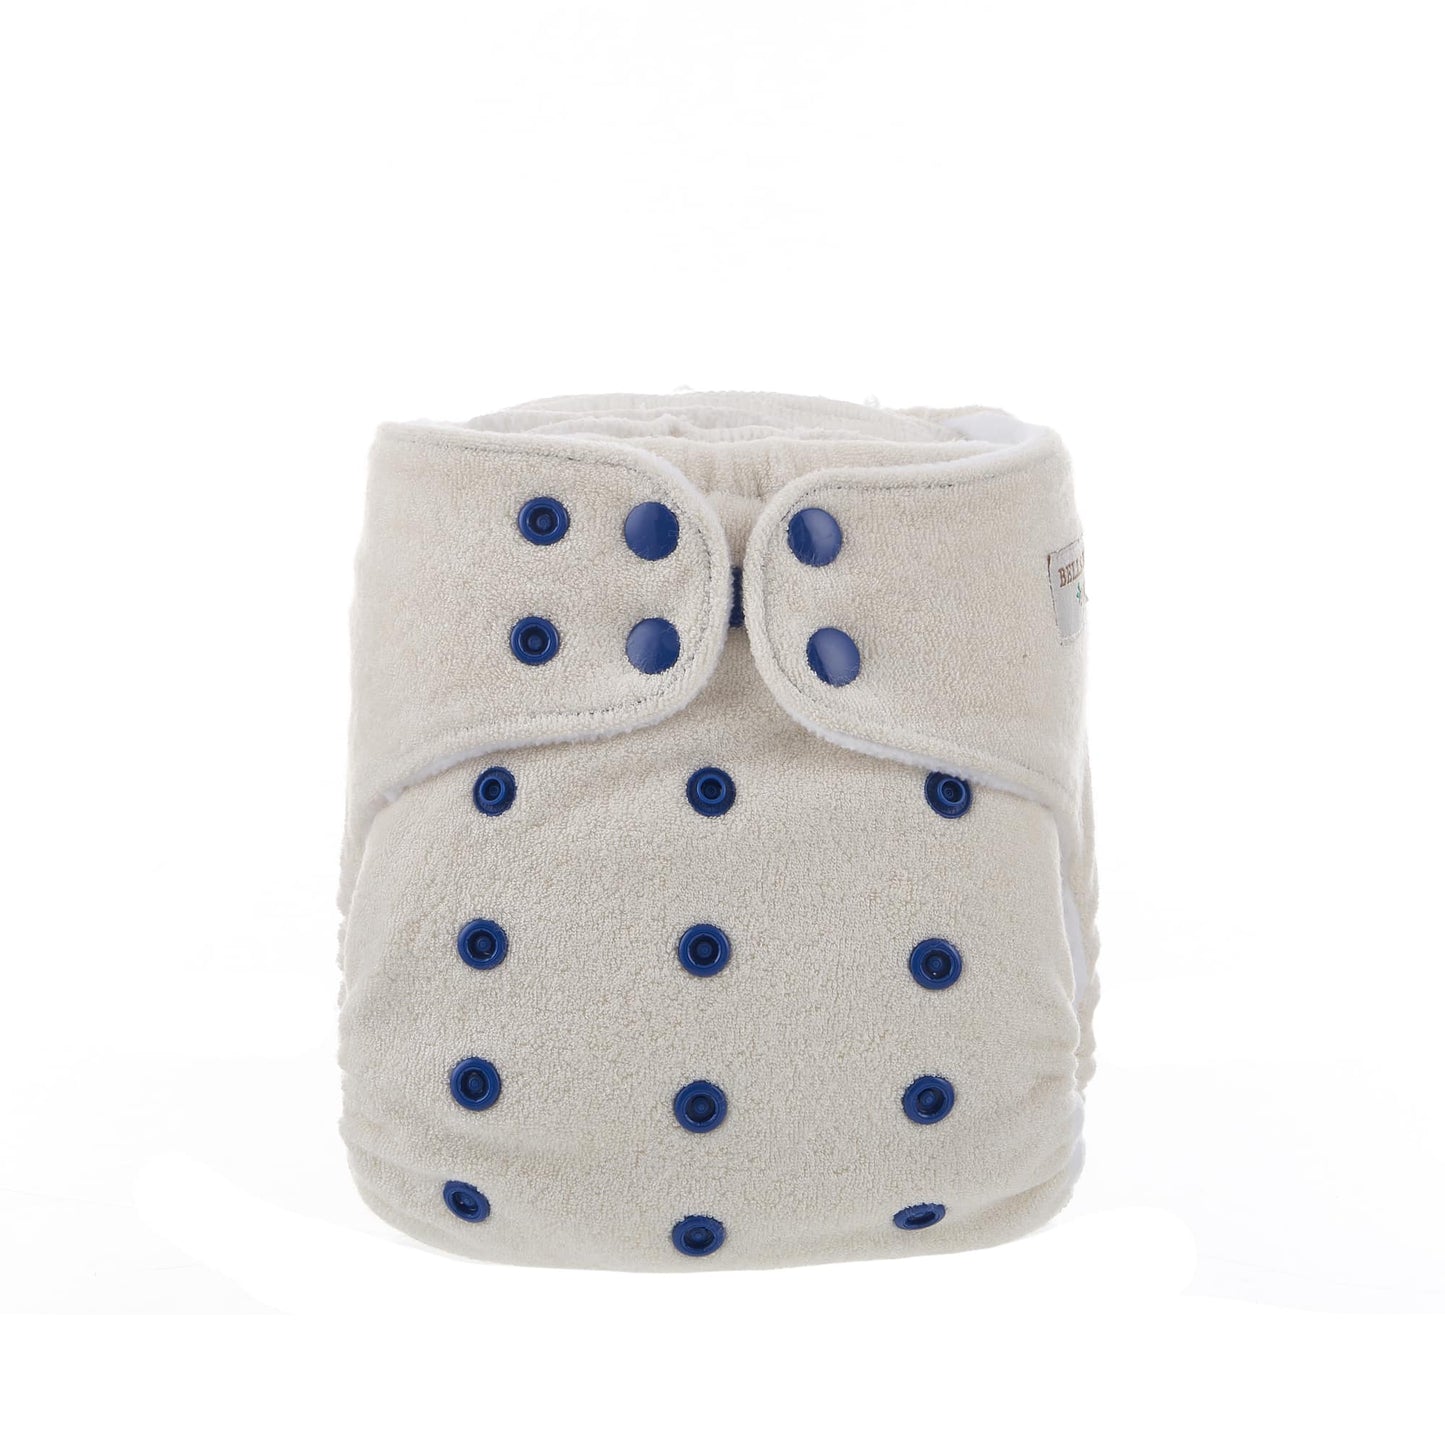 An image of a hemp fitted nappy with dark blue poppers.